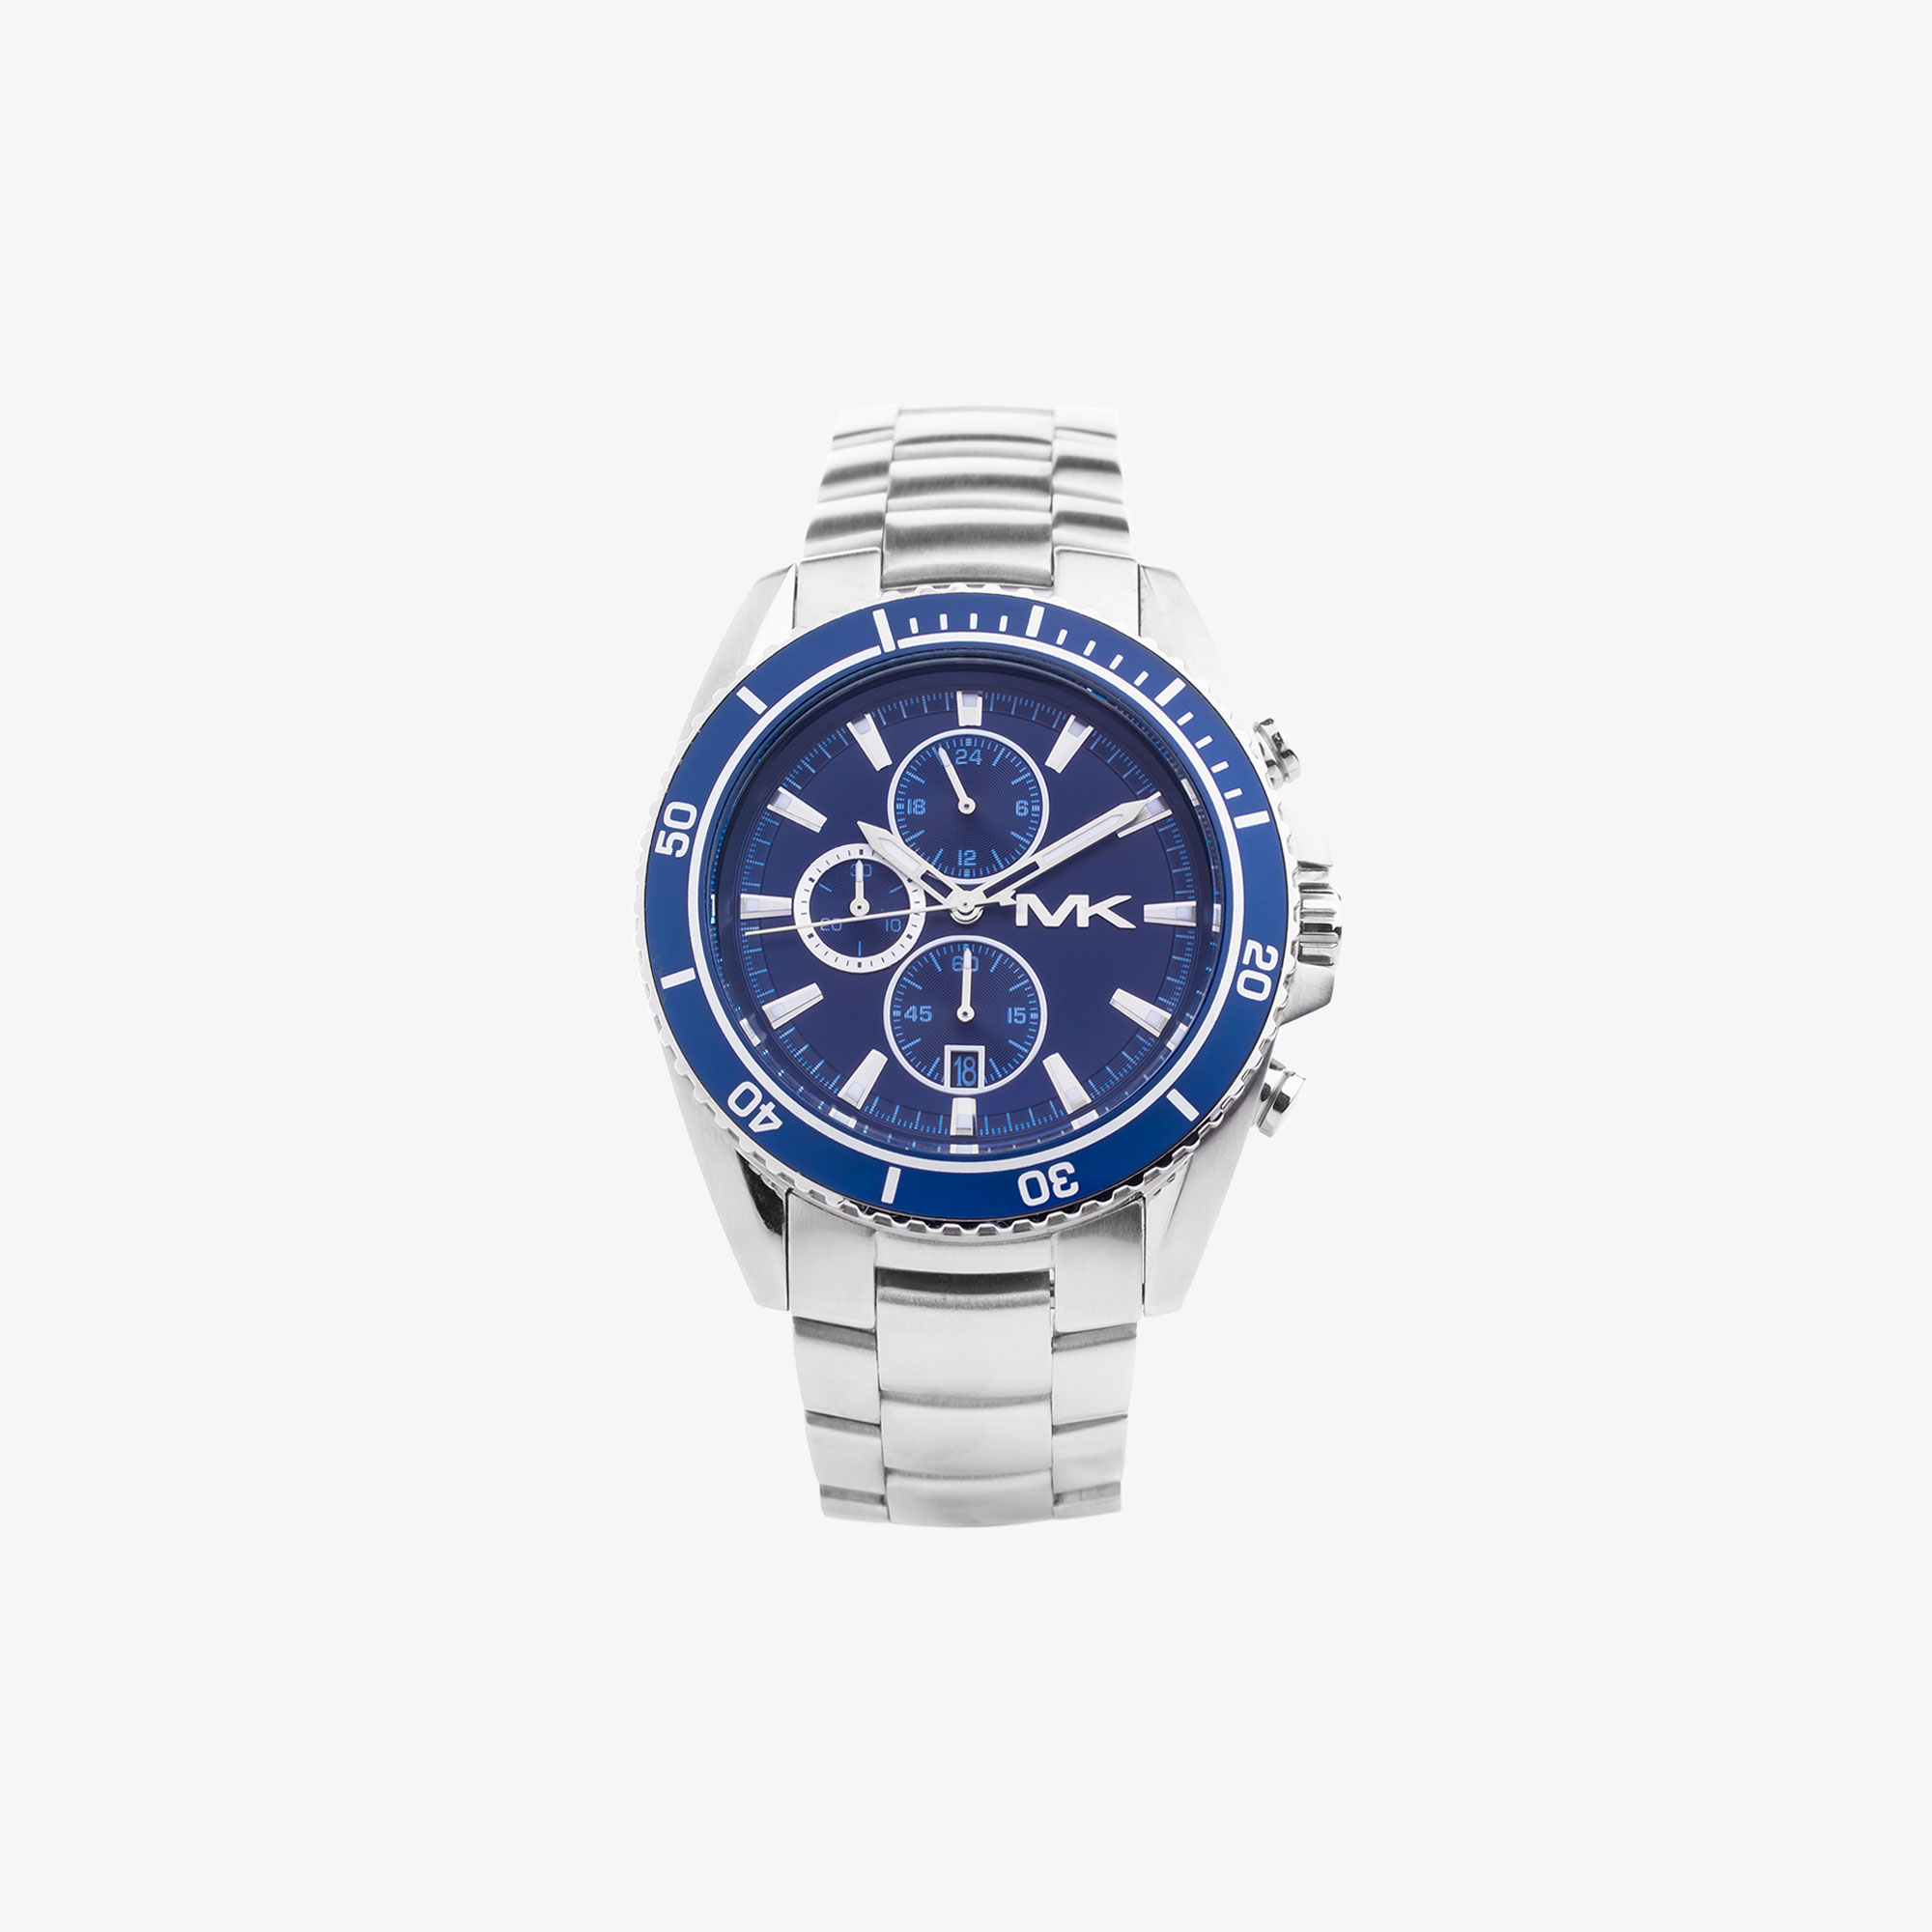 MICHAEL KORS JETMASTER CHRONOGRAPH WITH BLUE DIAL